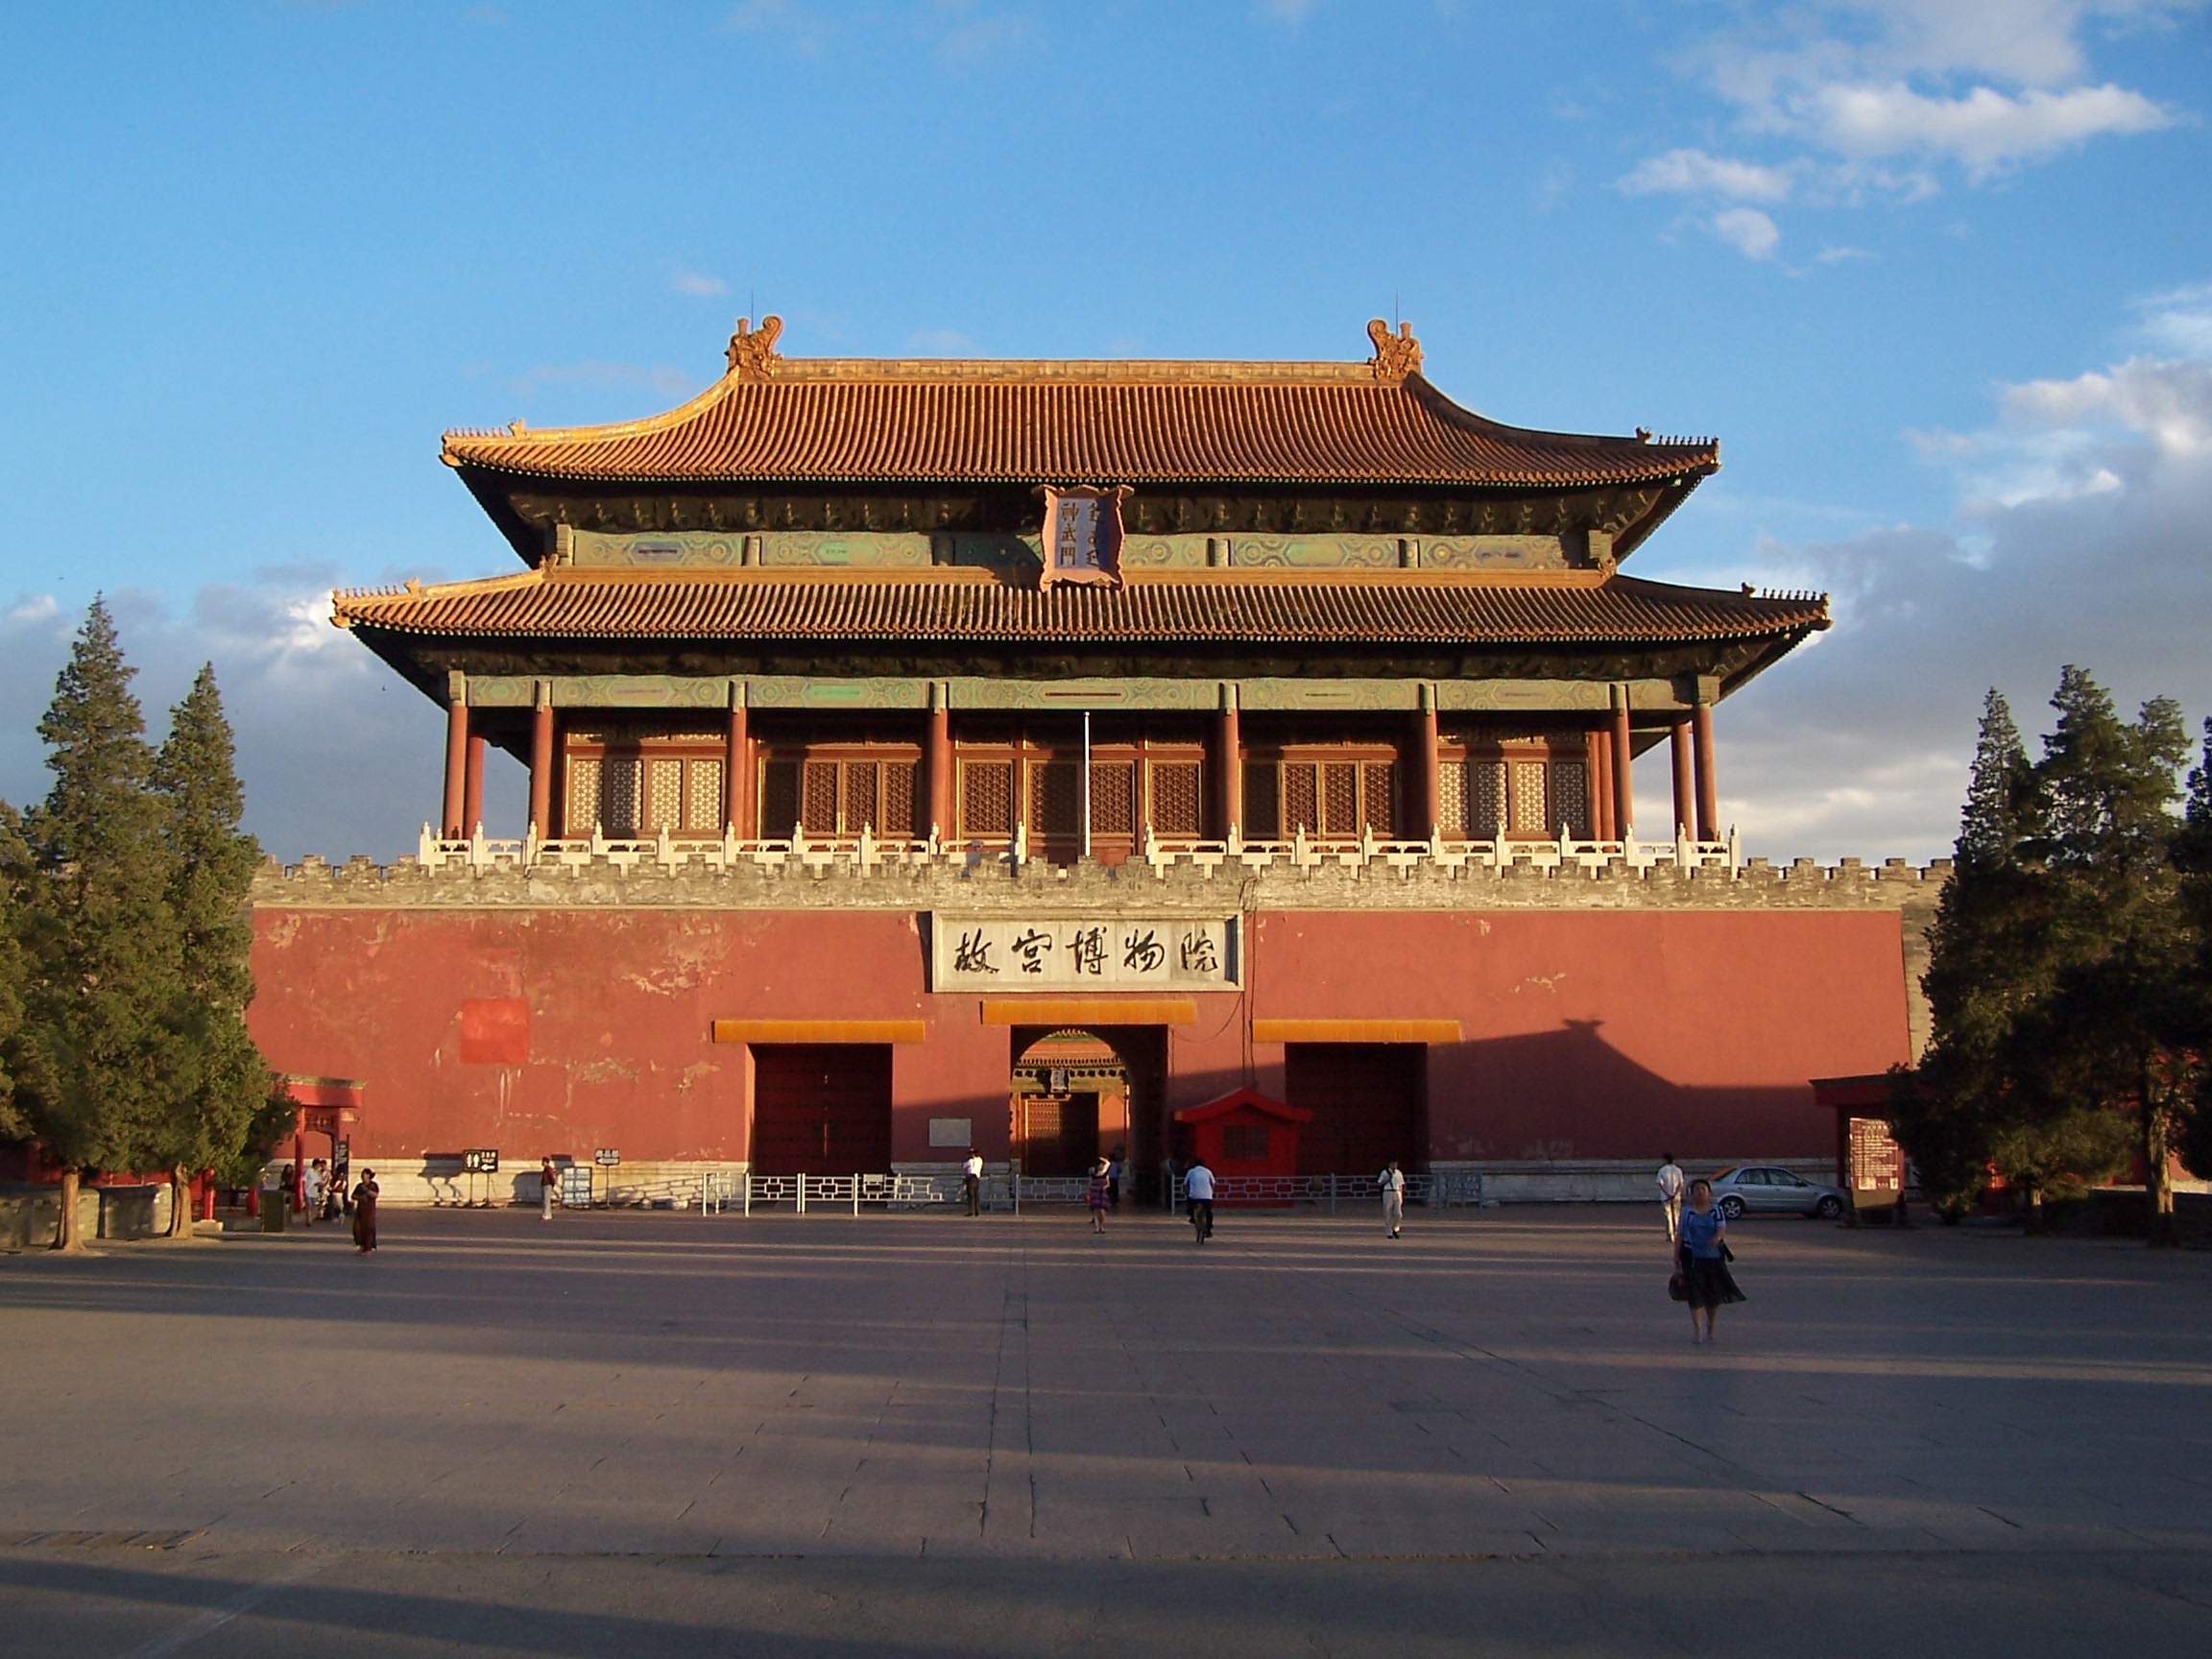 Enterance to the Forbidden City (Image from WikiPedia)